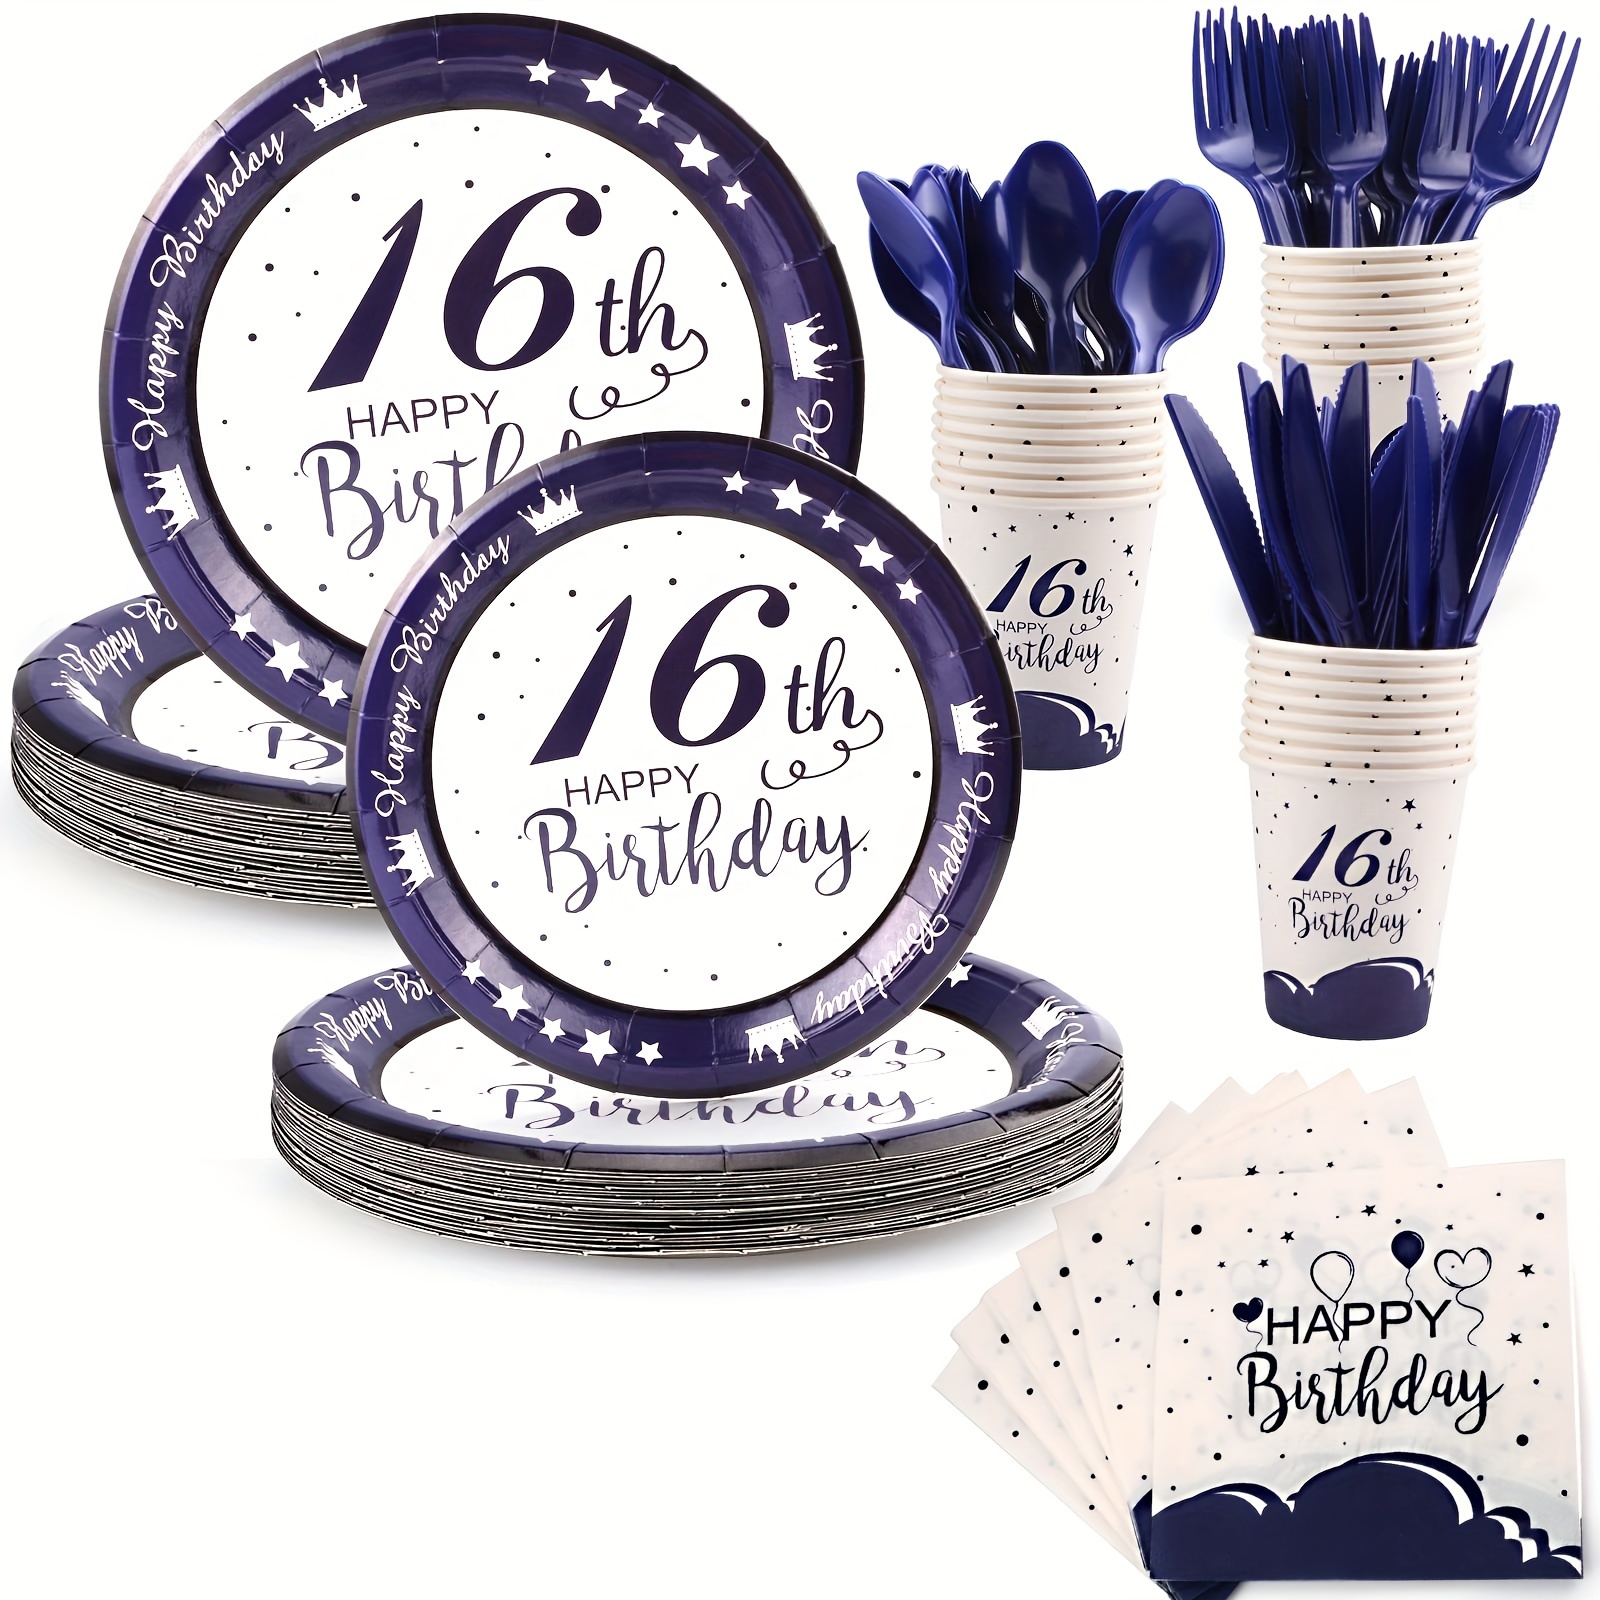 

16th Birthday Decorations For Plates And Napkins, 168pcs Dark Blue And White Party Tablewere With Dessert Plates, Cups, Knifes, Forks, Spoons For 16 Birthday Party - Dinnerware Serves 24